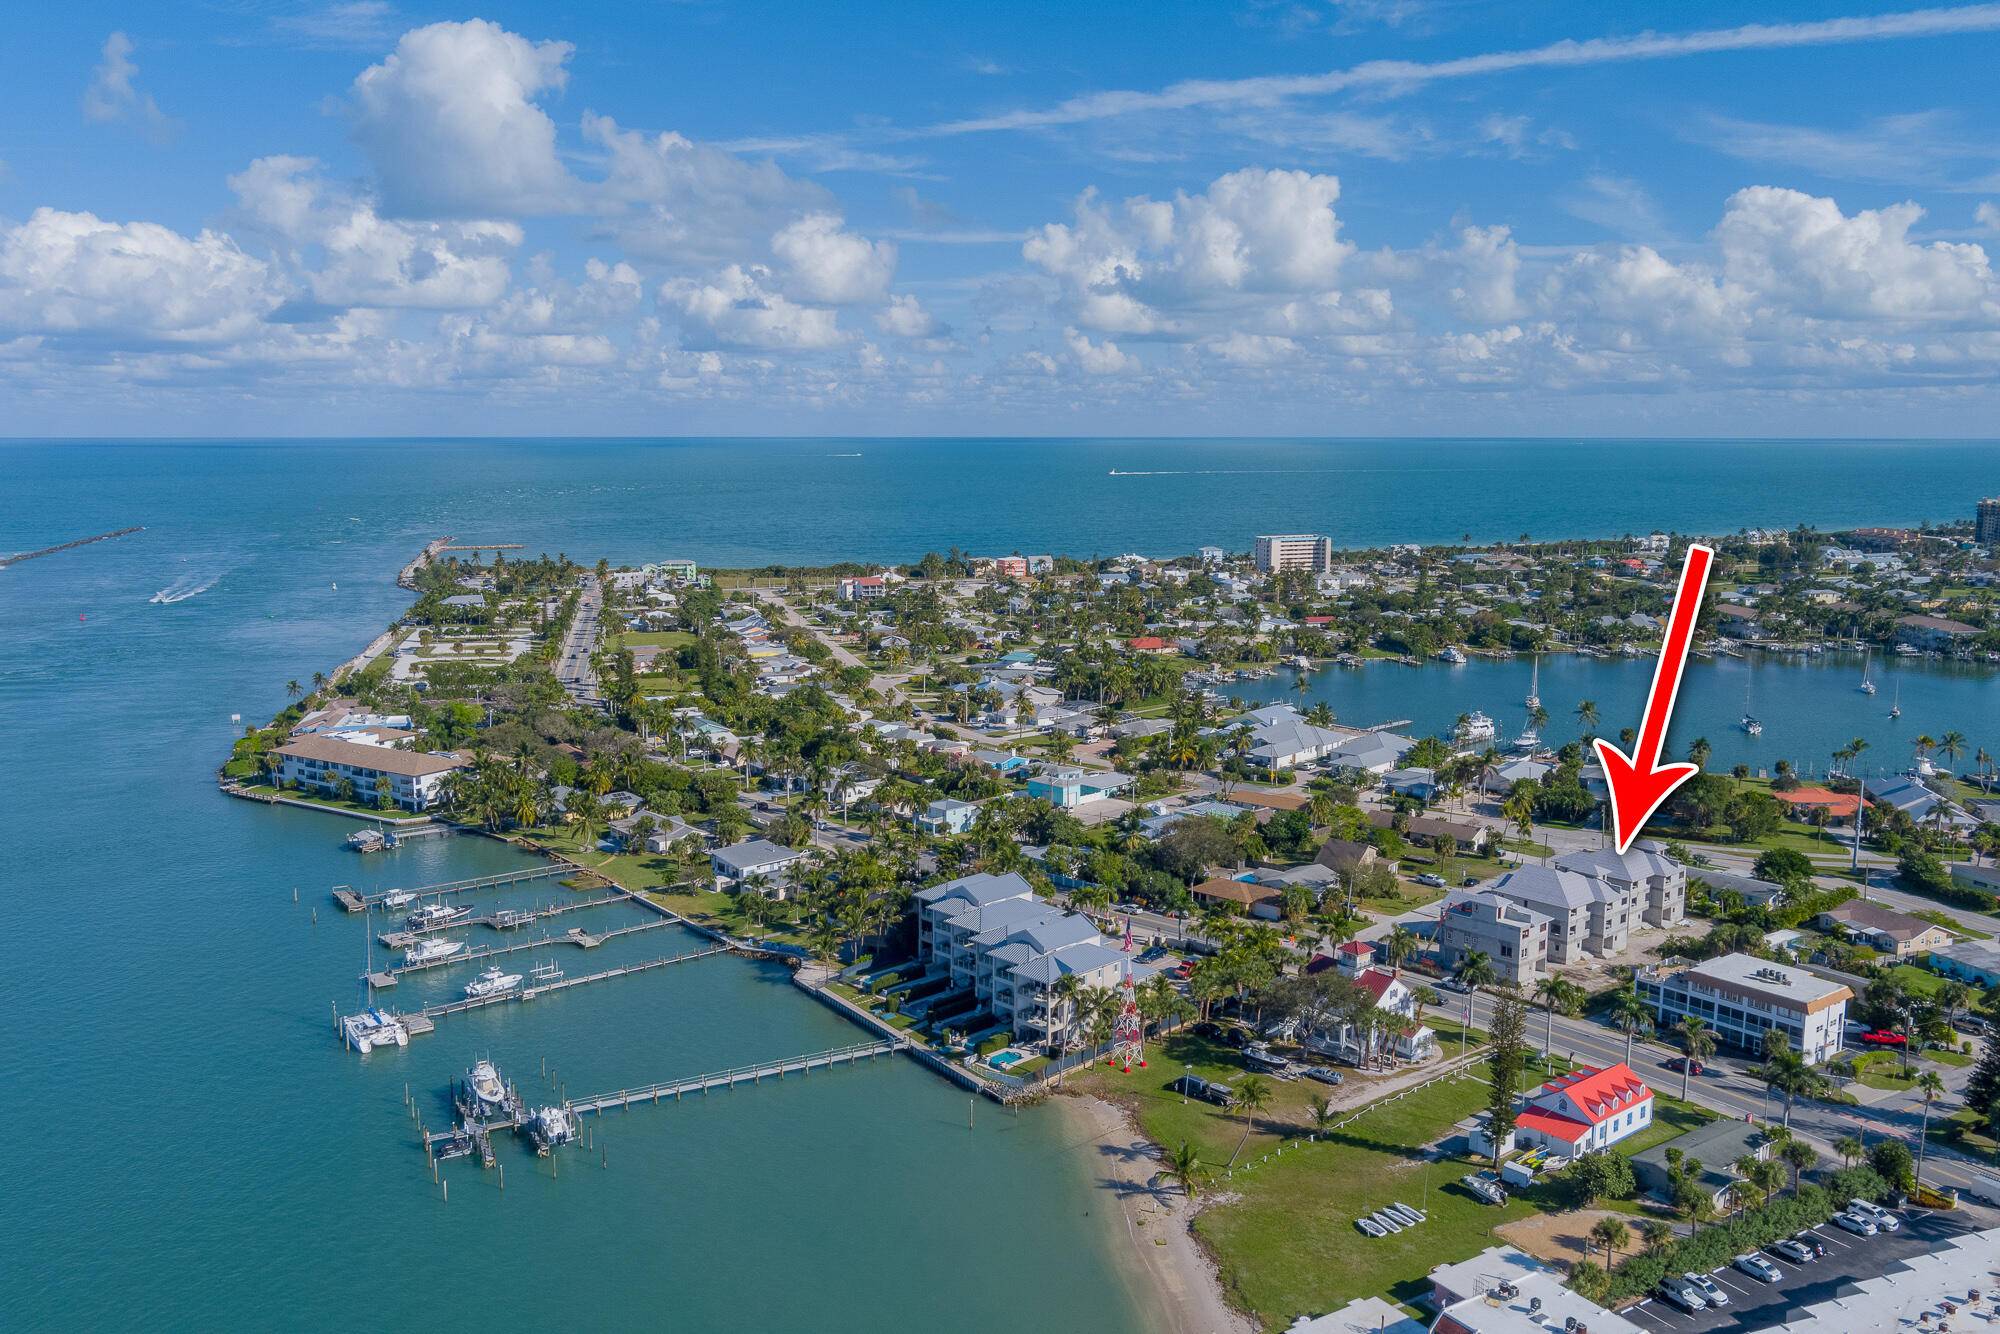 Discover unparalleled coastal living with this exquisite, brand new development located on sunny South Hutchinson Island.